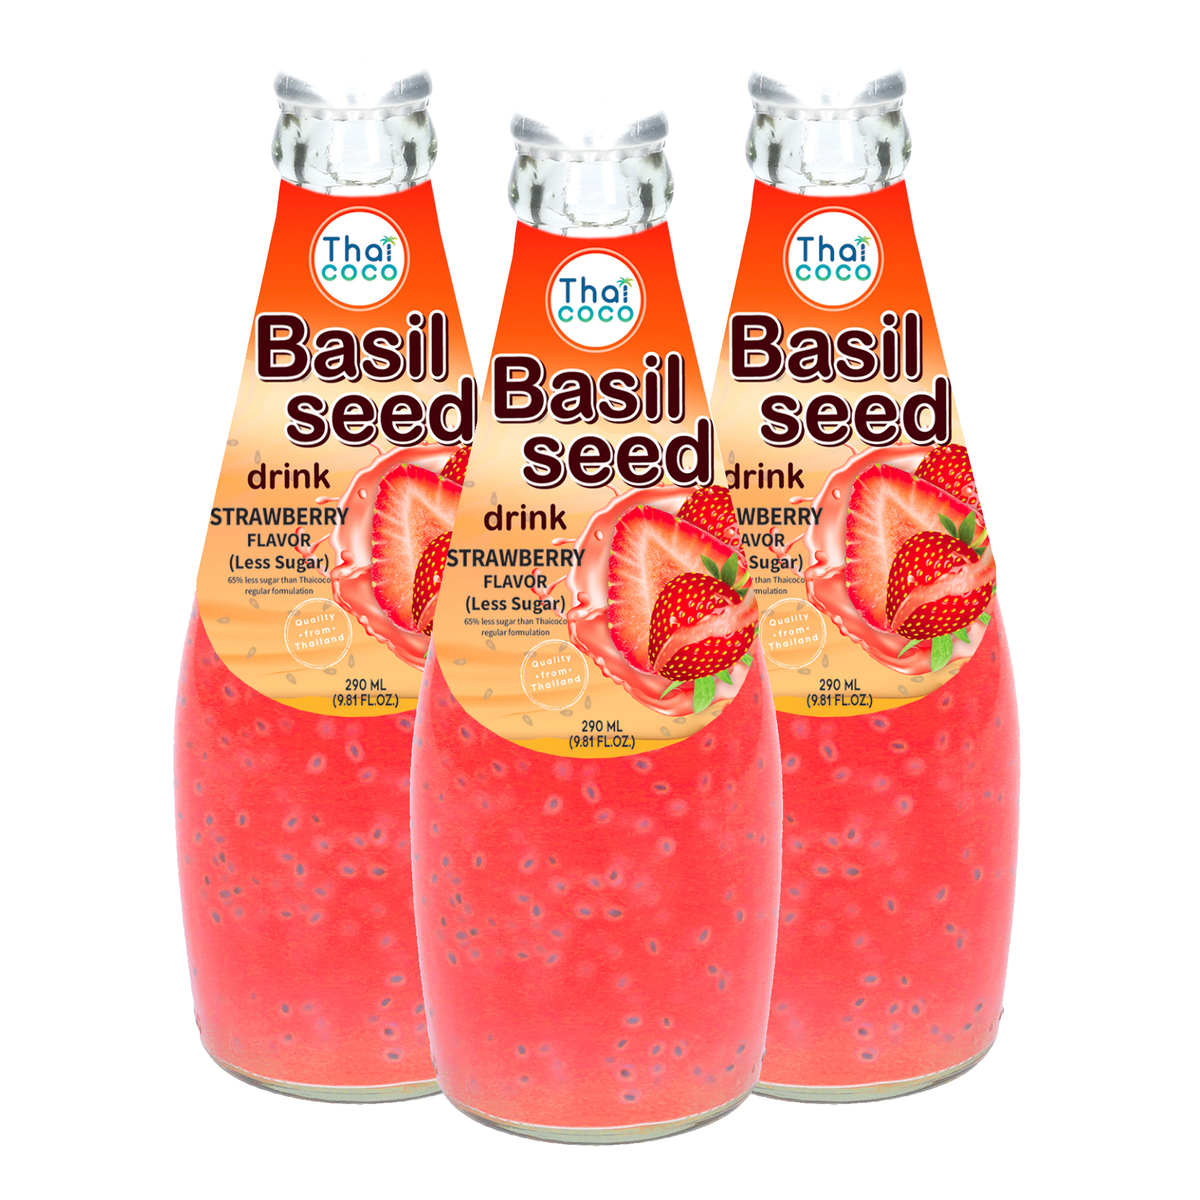 Thai Coco Basil Seed Drink With Strawberry Flavour Value Pack 3 x 290ml